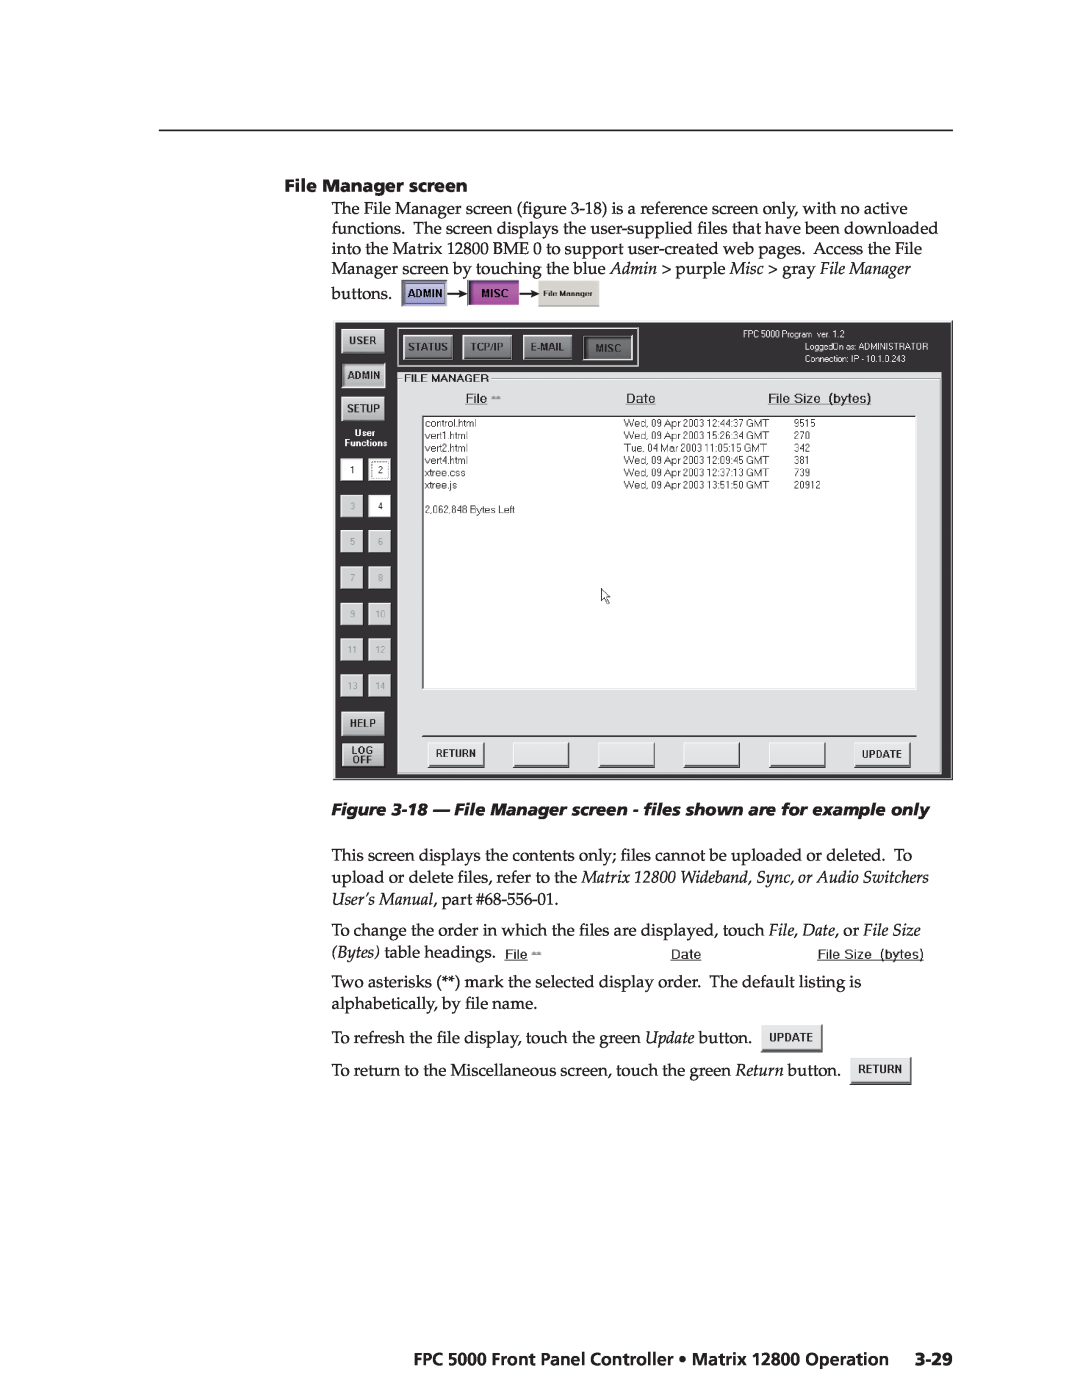 Extron electronic FPC 5000 manual 18 - File Manager screen - files shown are for example only 